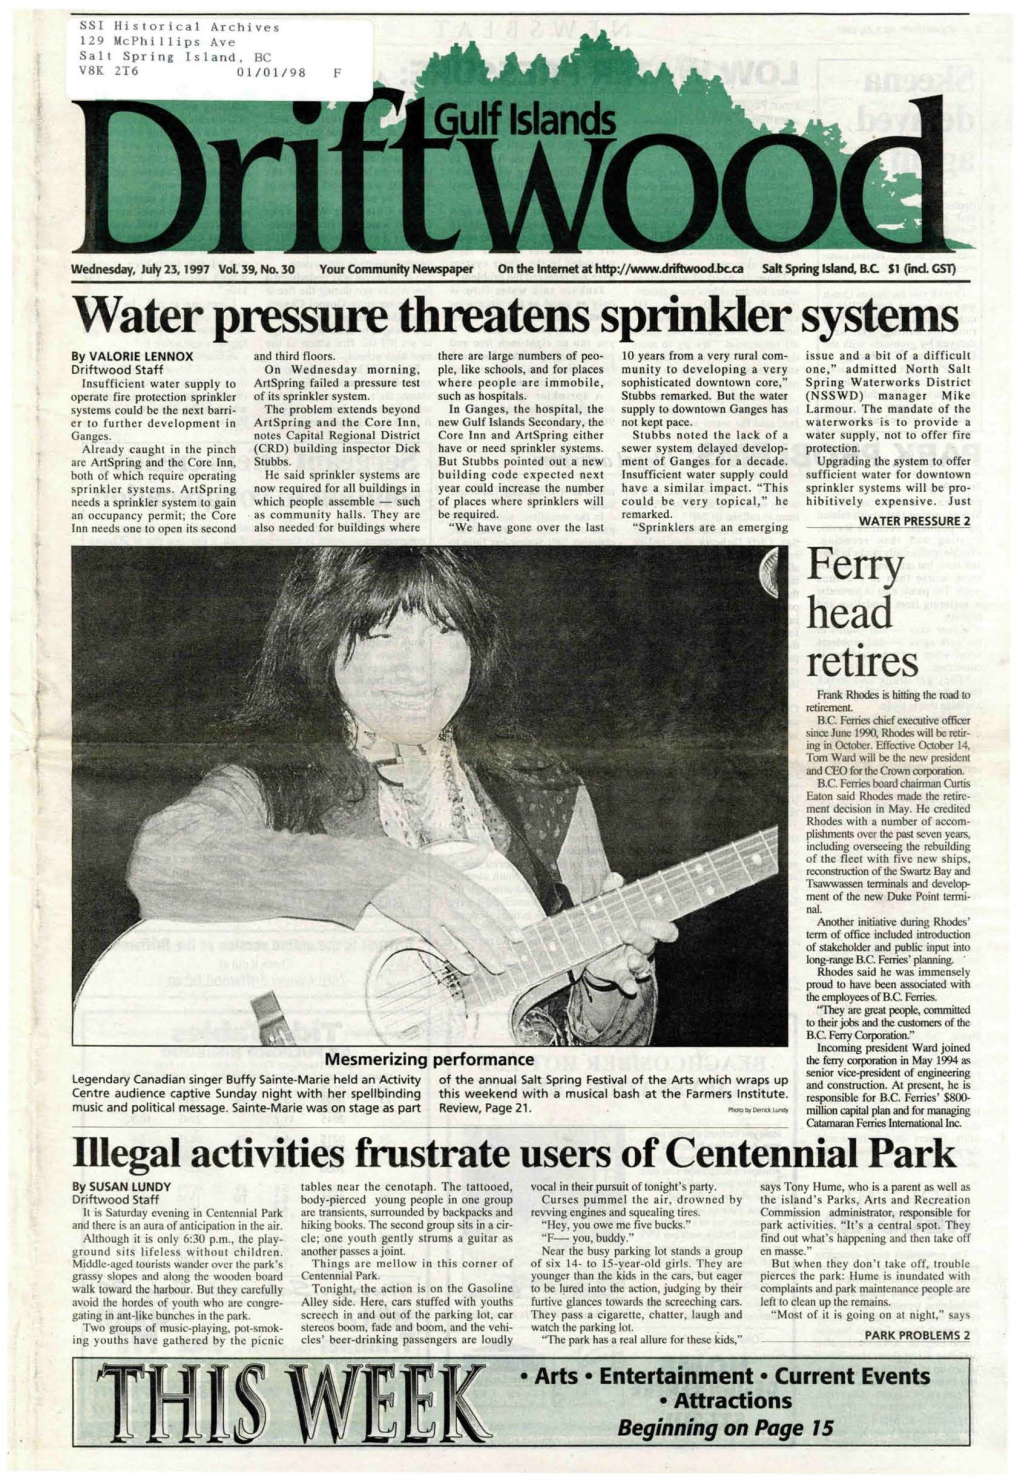 Water Pressure Threatens Sprinkler Systems Ferry Head Retires Illegal Activities Frustrate Users of Centennial Park